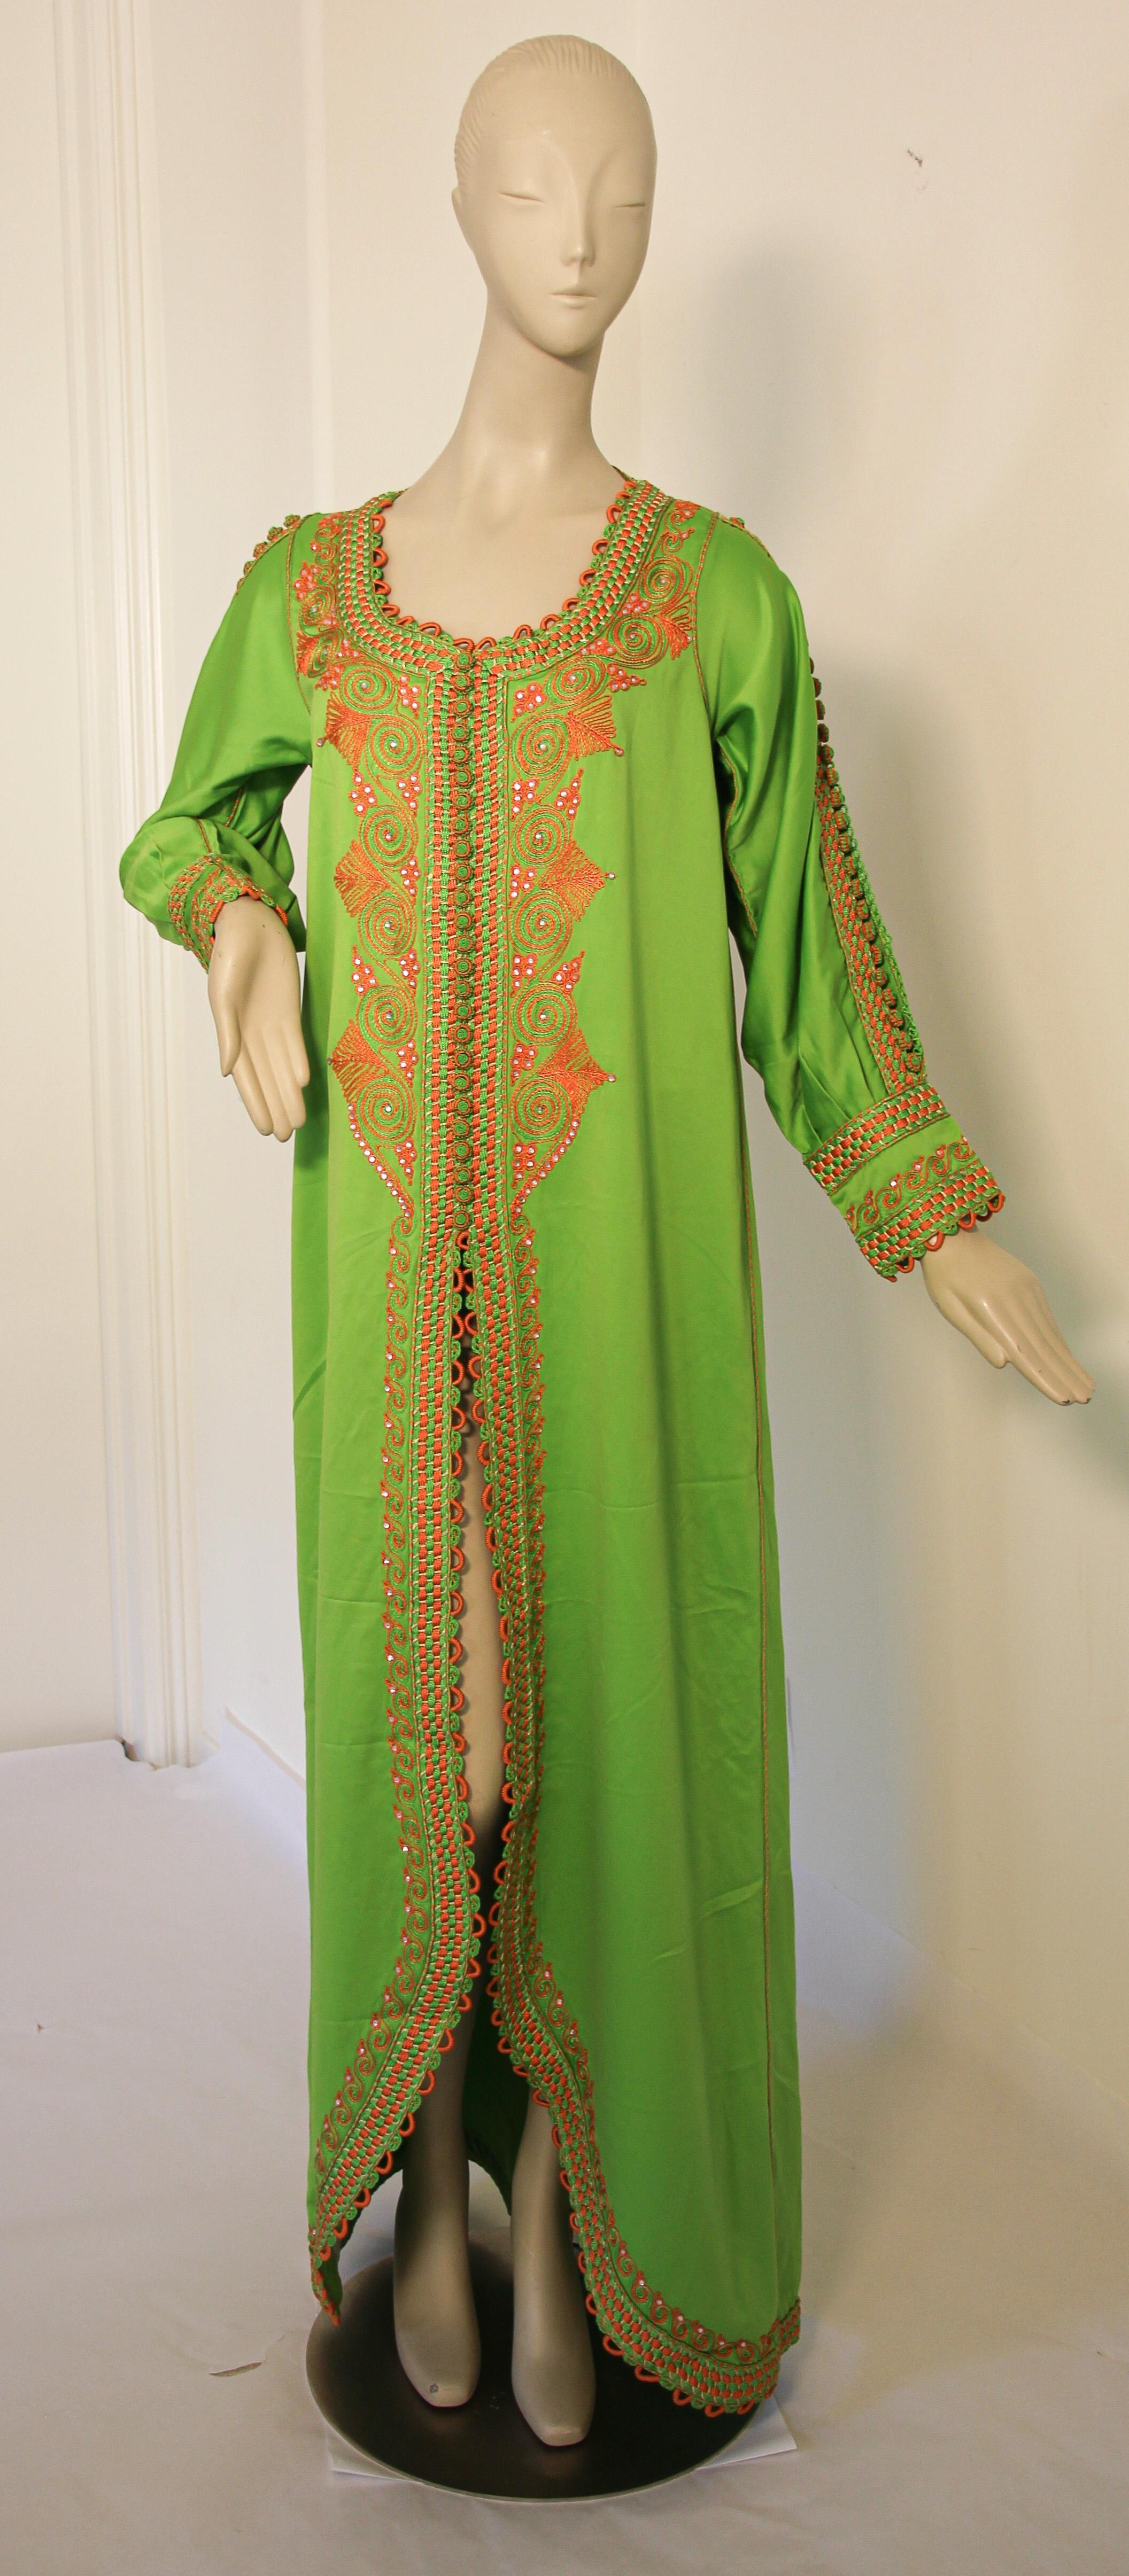 Elegant Moroccan caftan in Kelly green and orange embroidered.
circa 1970s.
This long maxi dress kaftan is embroidered and embellished entirely by hand.
It’s crafted in Morocco and tailored for a relaxed fit.
One of a kind evening Moroccan Middle